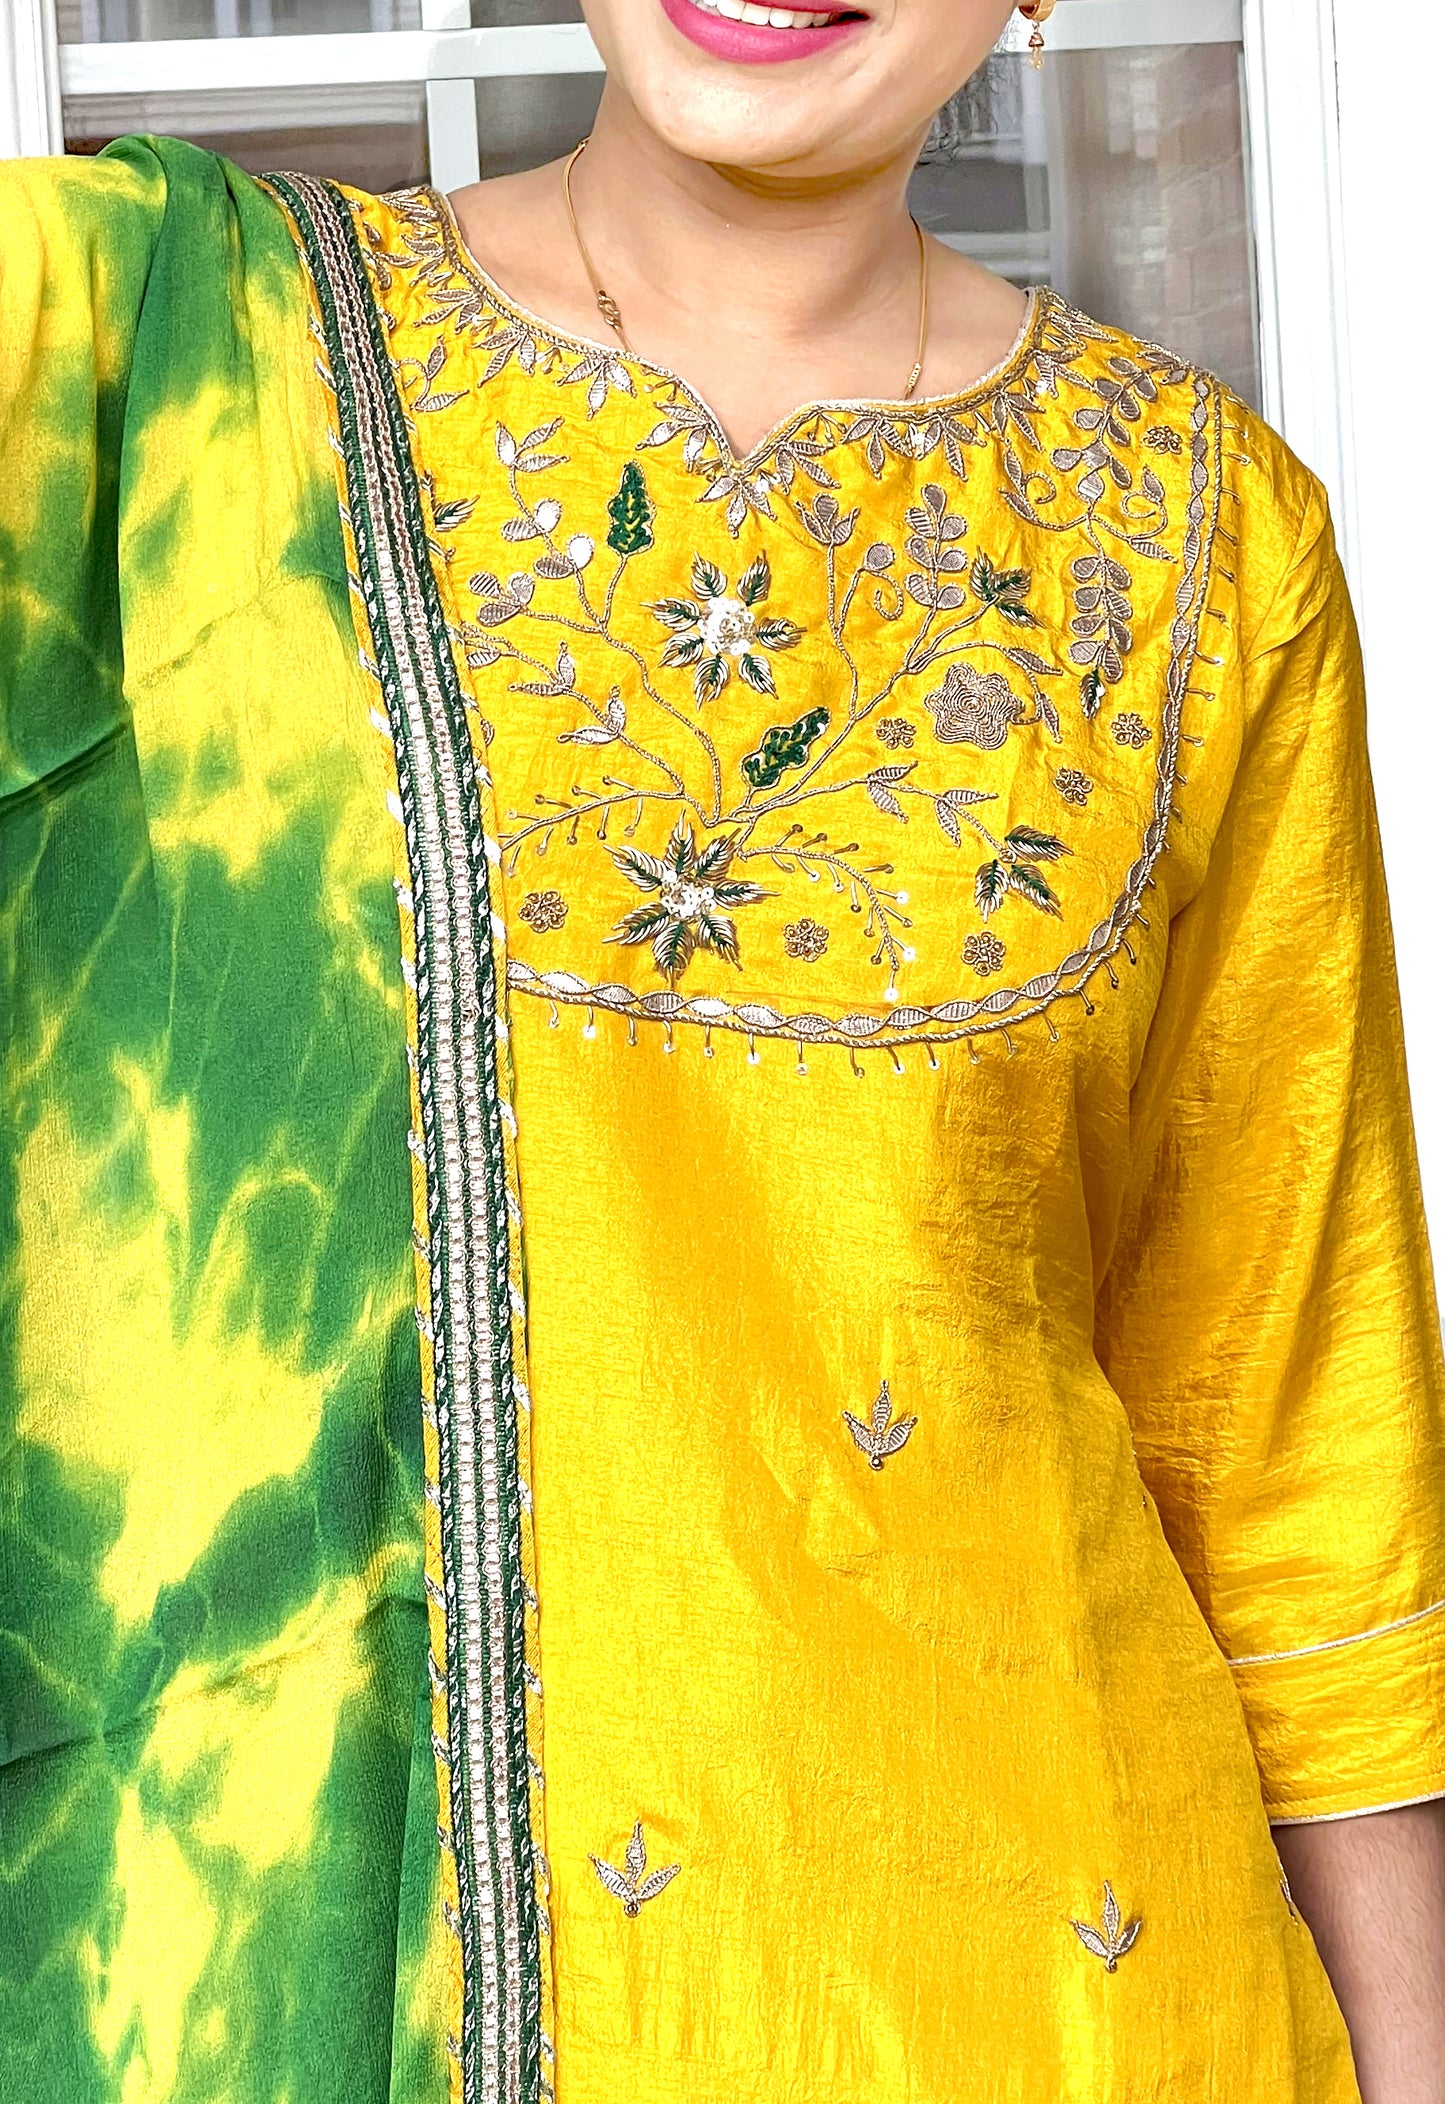 Yellow & Green color Hand Tie n Dye Georgette Fabric with Traditional Gota Patti Hand Work Long Kurti Palazzo Pants with Dupatta